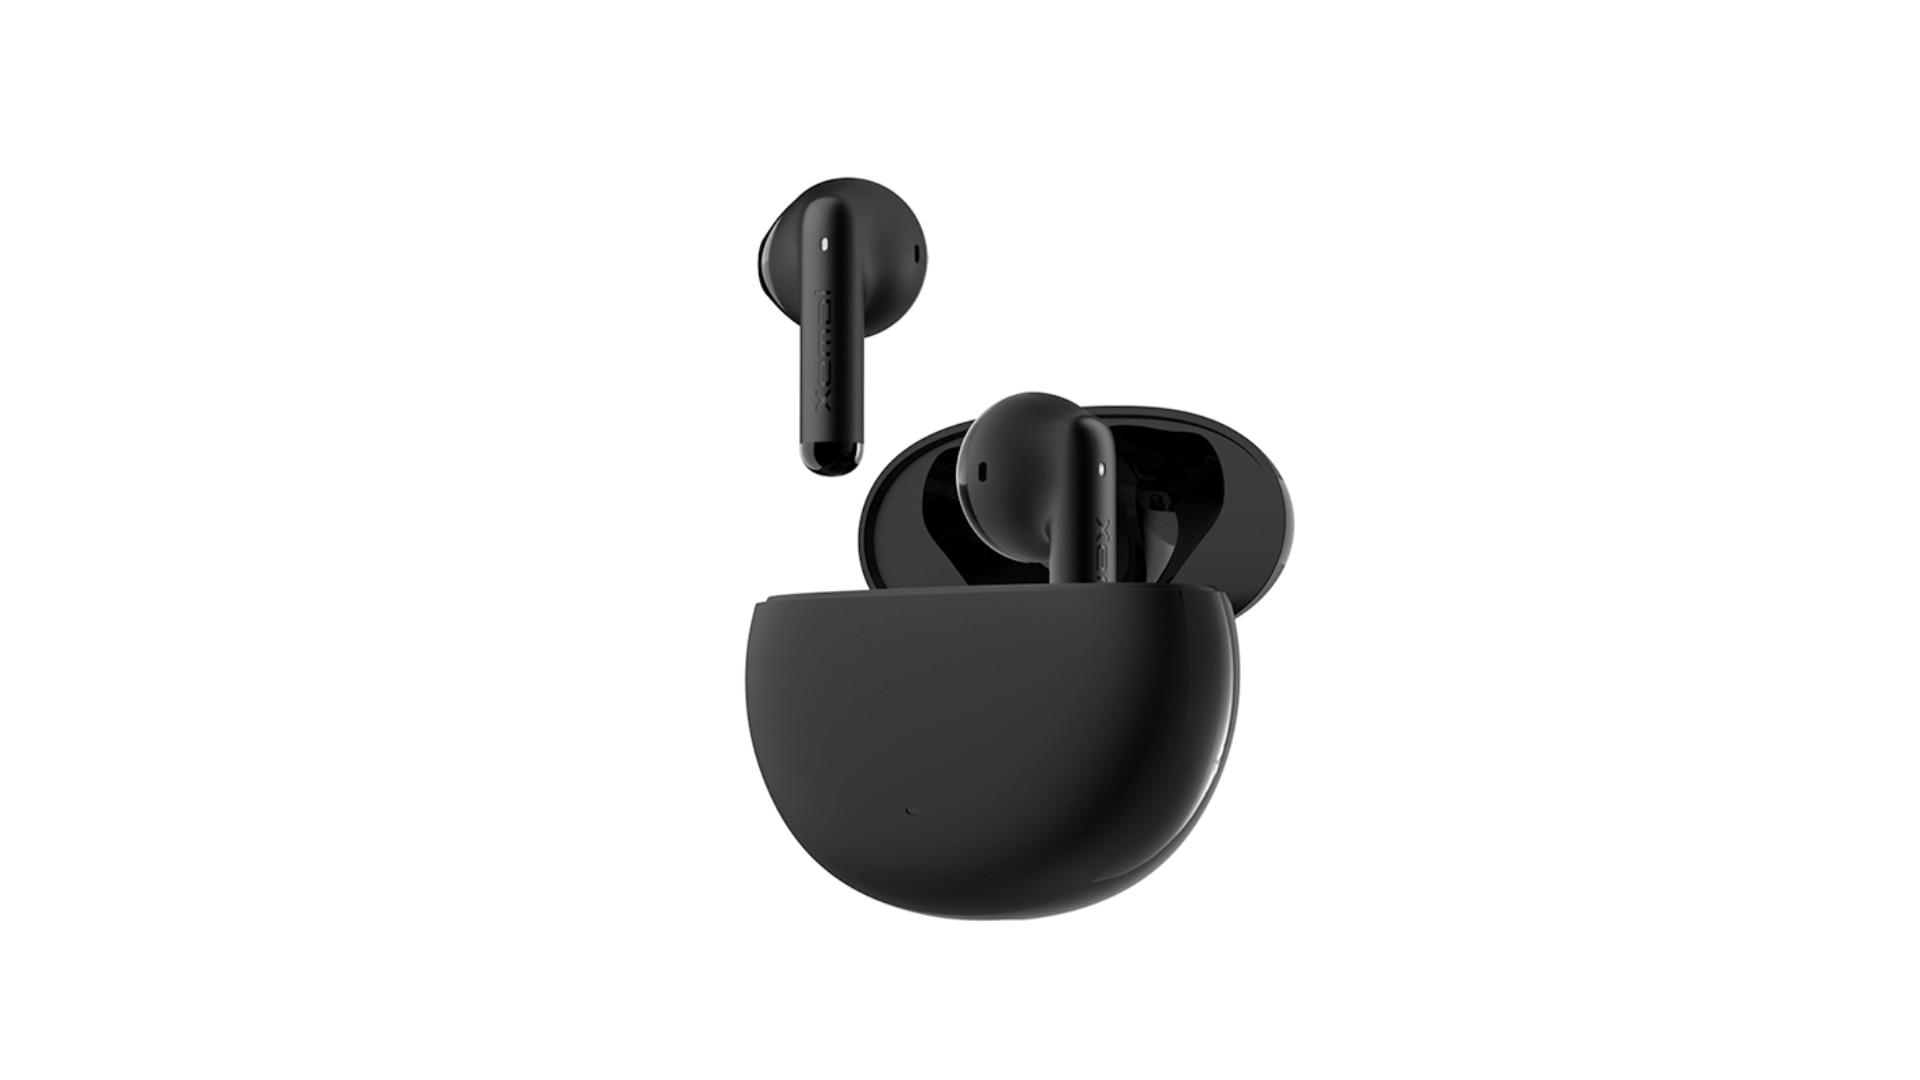 Edifier X2 TWS earbuds released with 7 hours battery life without case